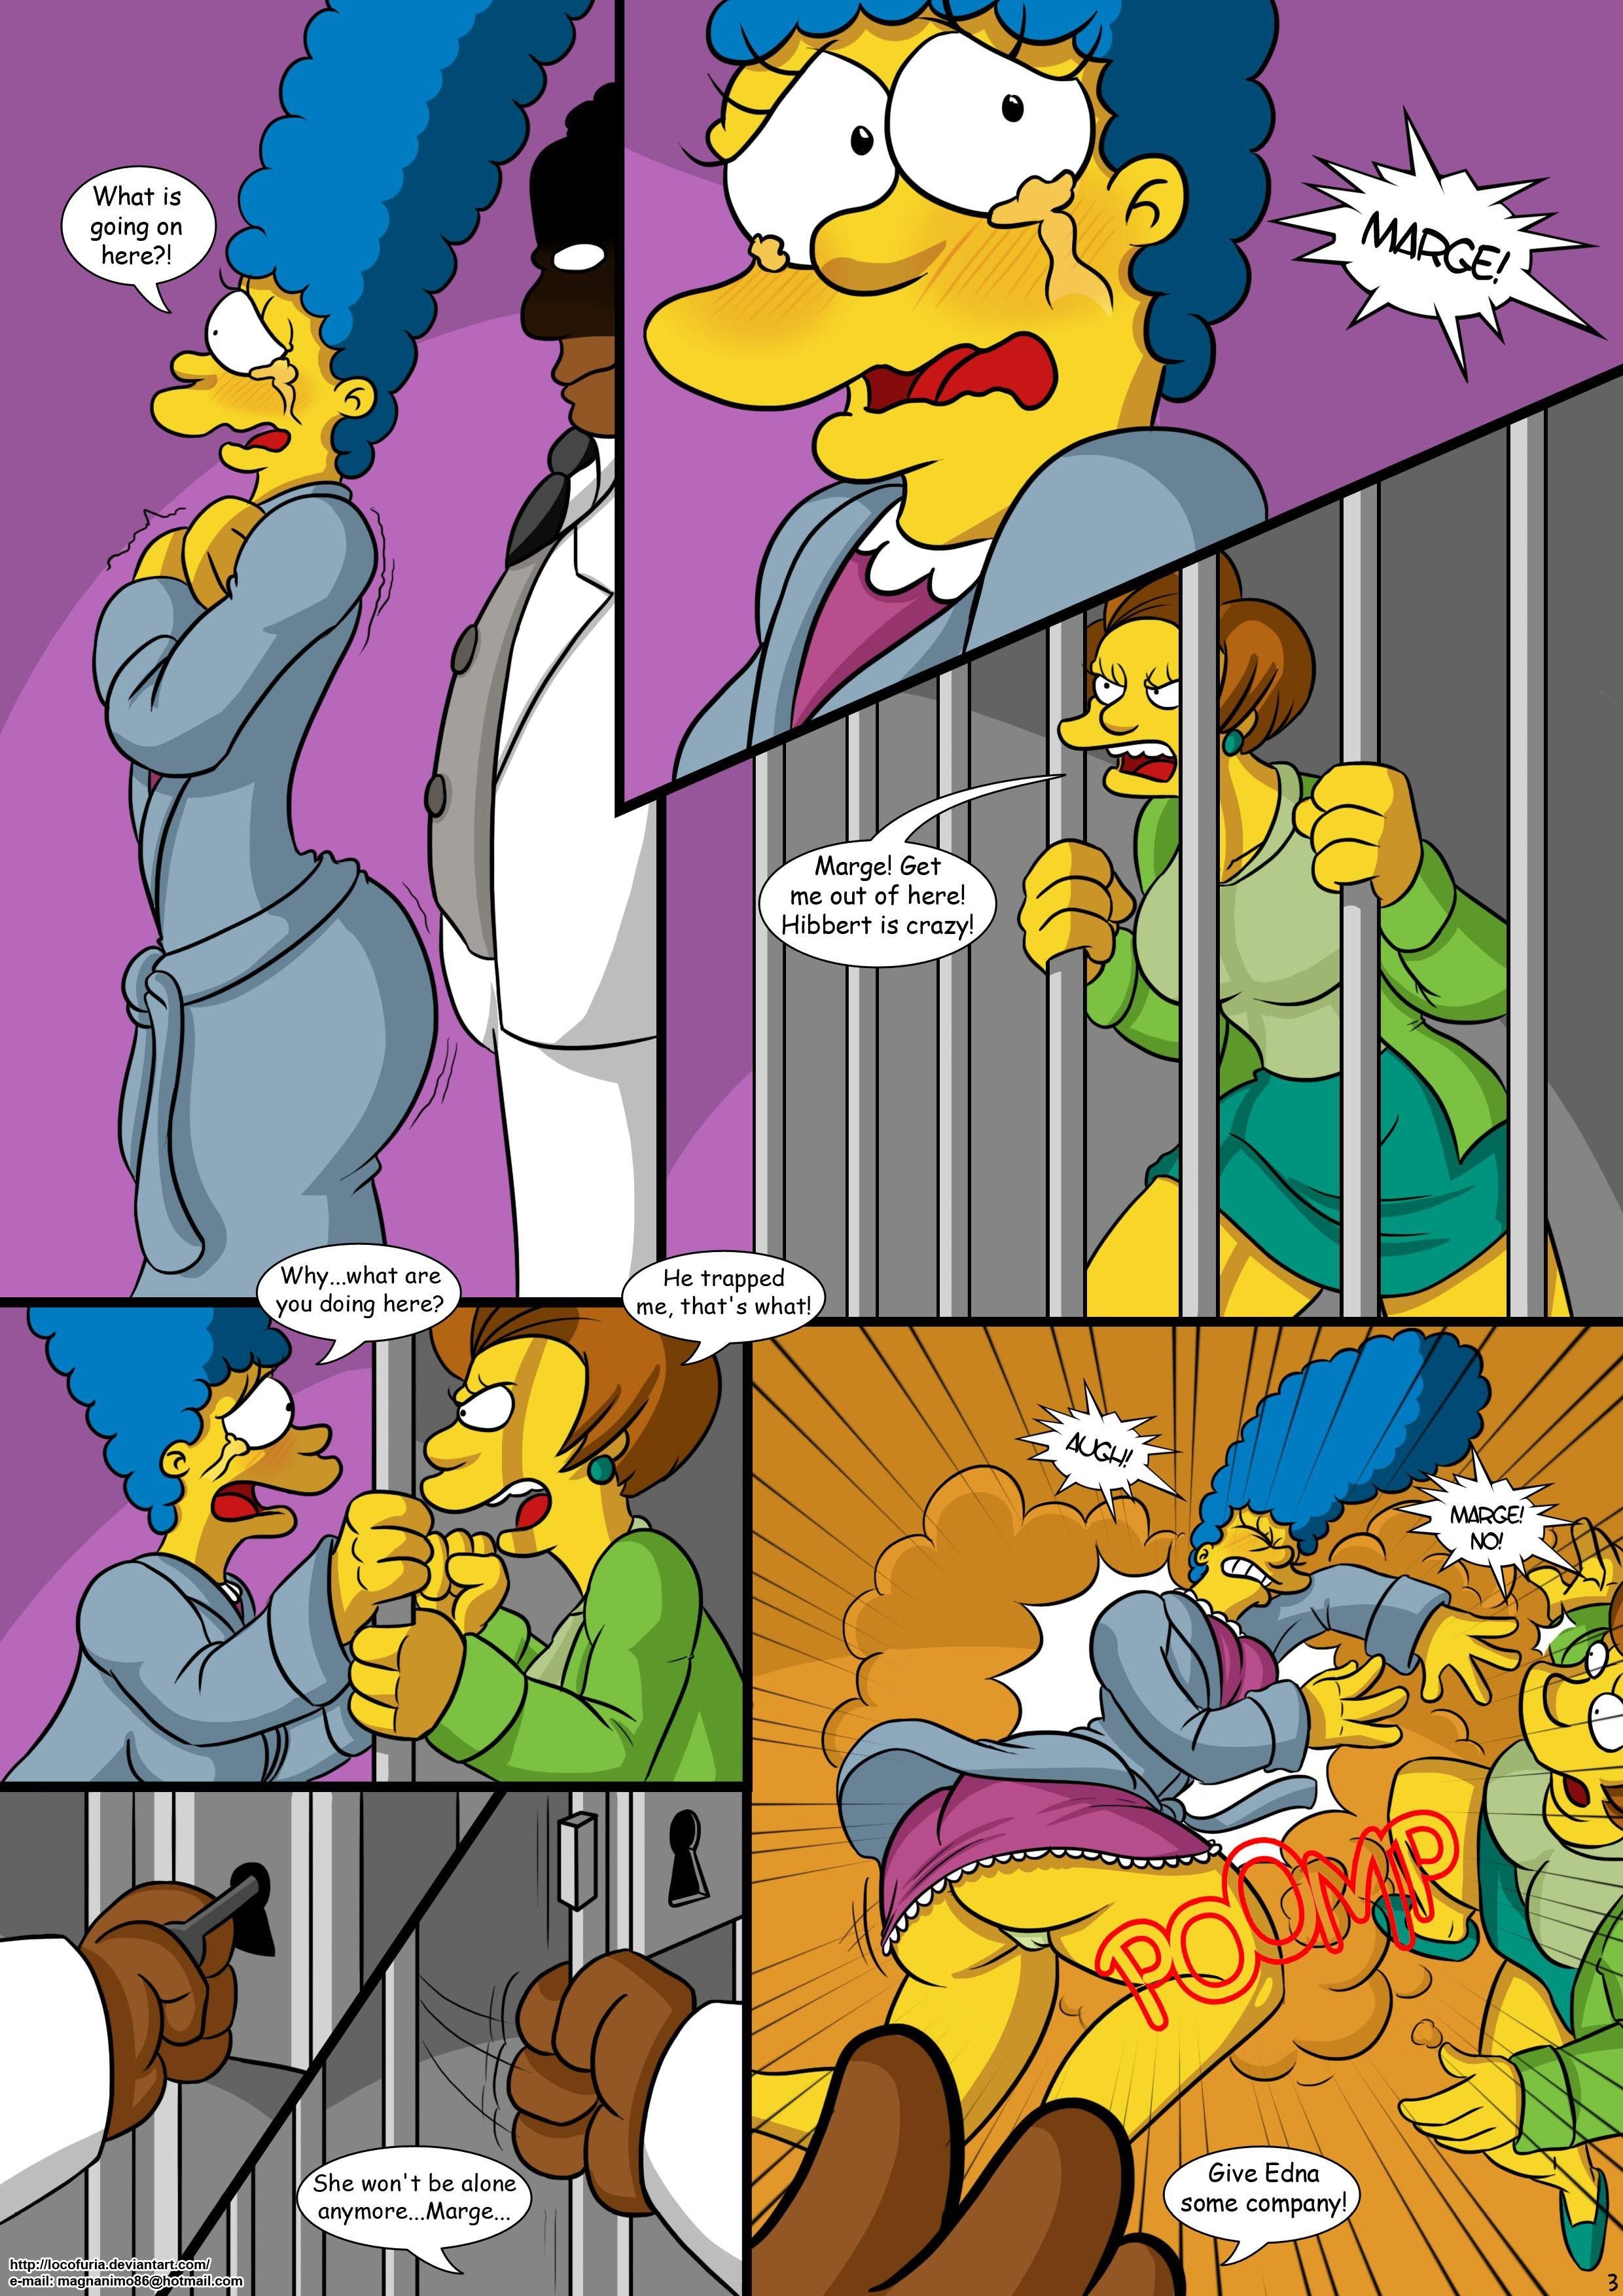 The Simpsons Gore Porn - Treehouse Of Horror (The Simpsons) [KogeiKun] - 1 . Treehouse Of Horror -  Chapter 1 (The Simpsons) [KogeiKun] - AllPornComic